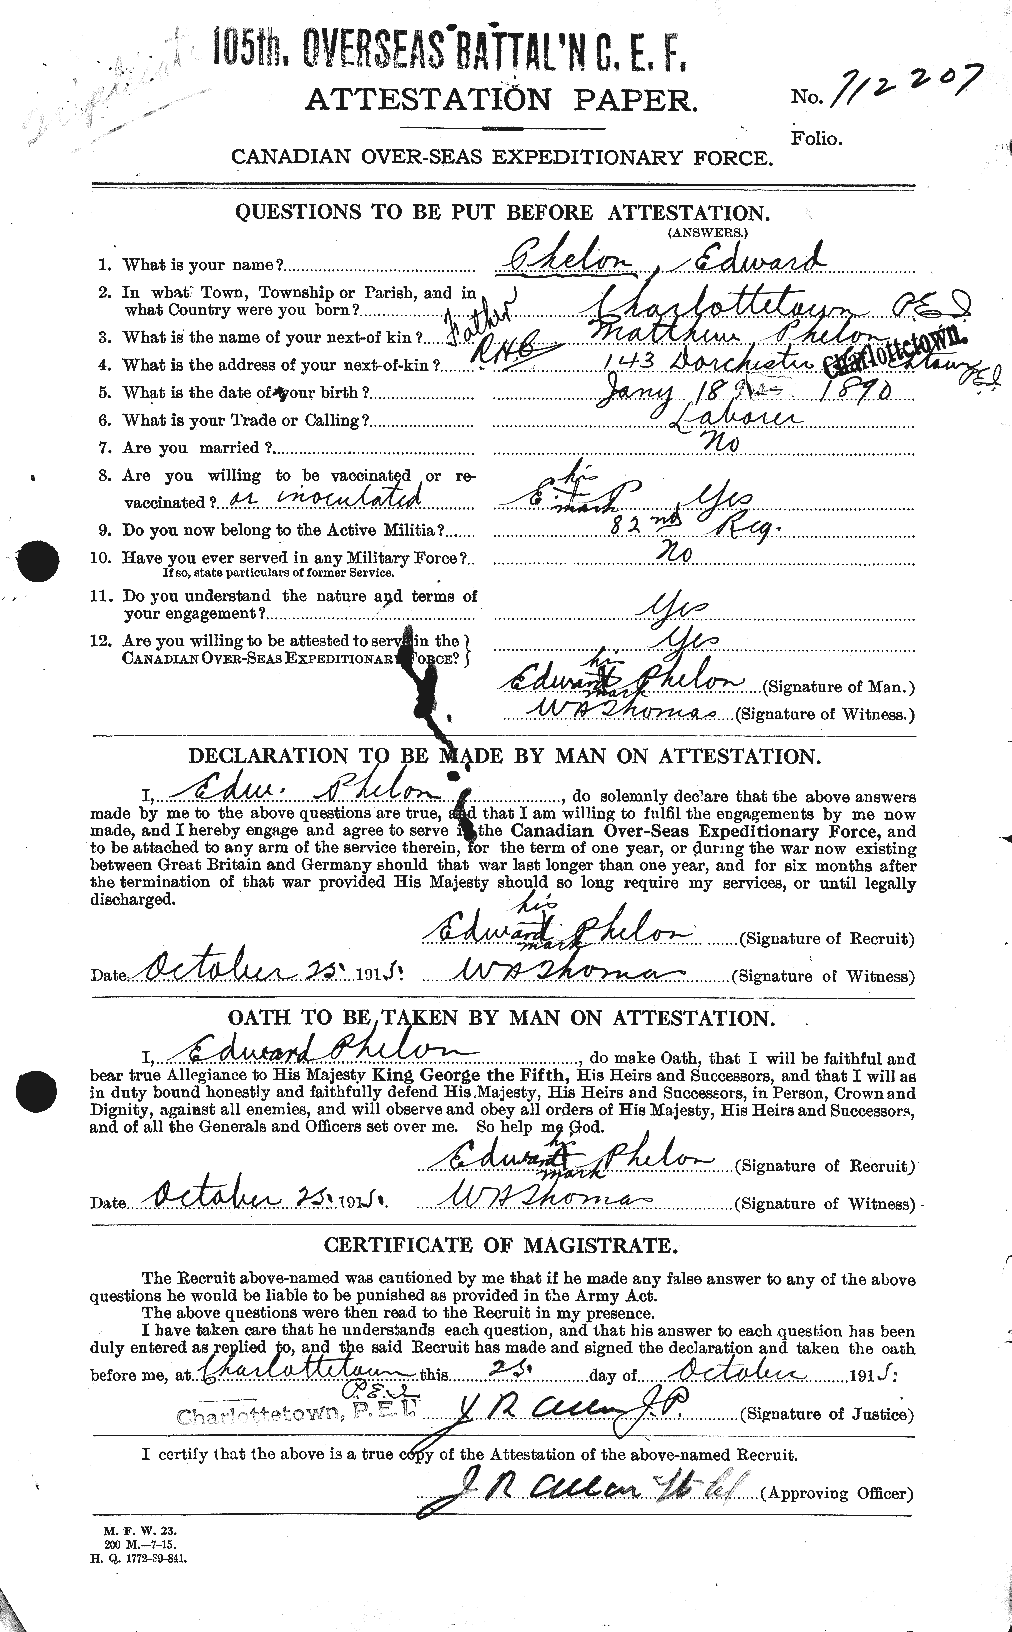 Personnel Records of the First World War - CEF 576979a